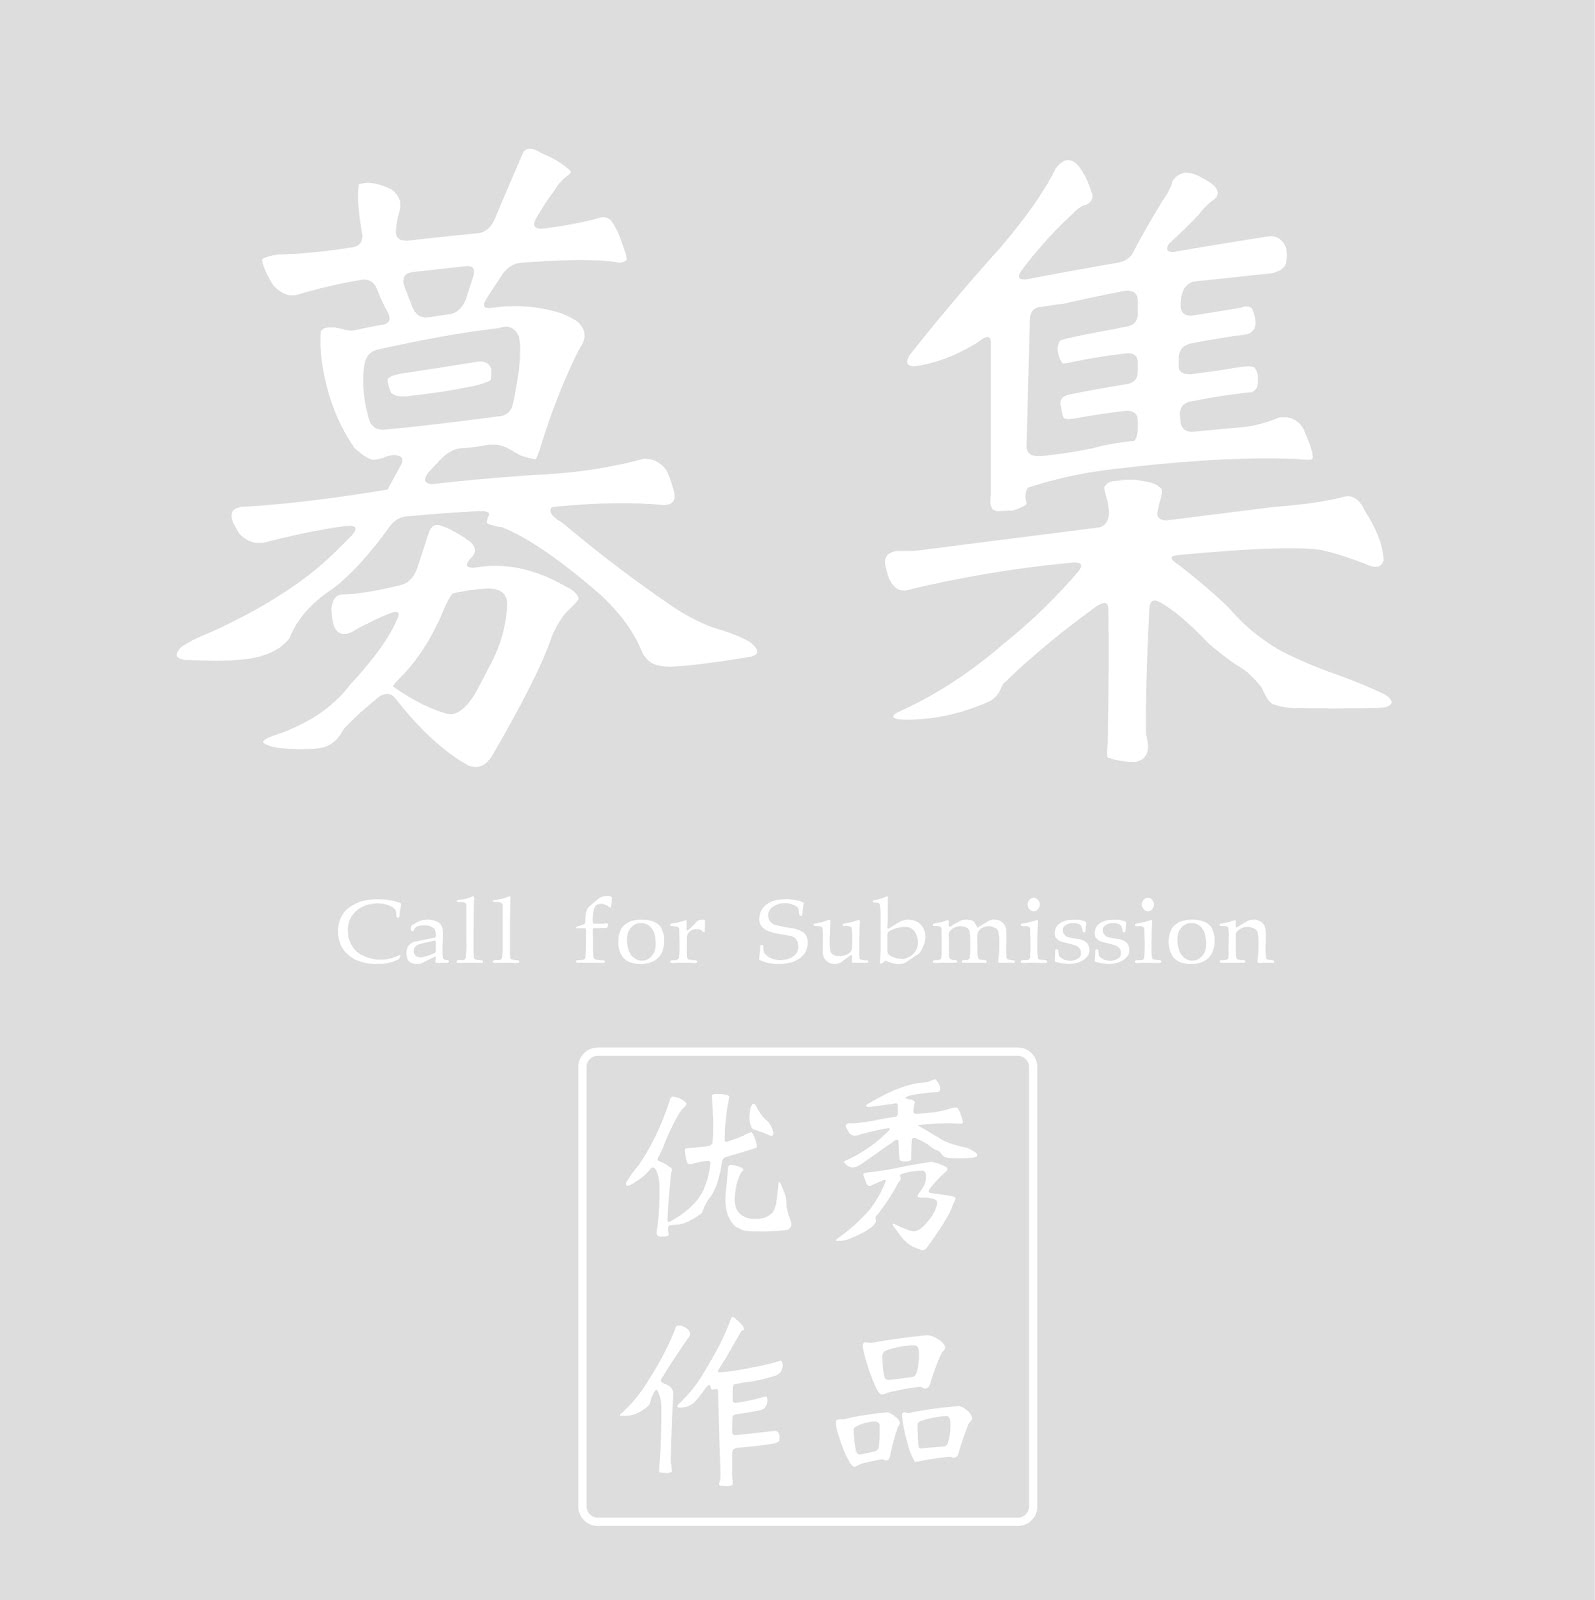 Submit Your Works